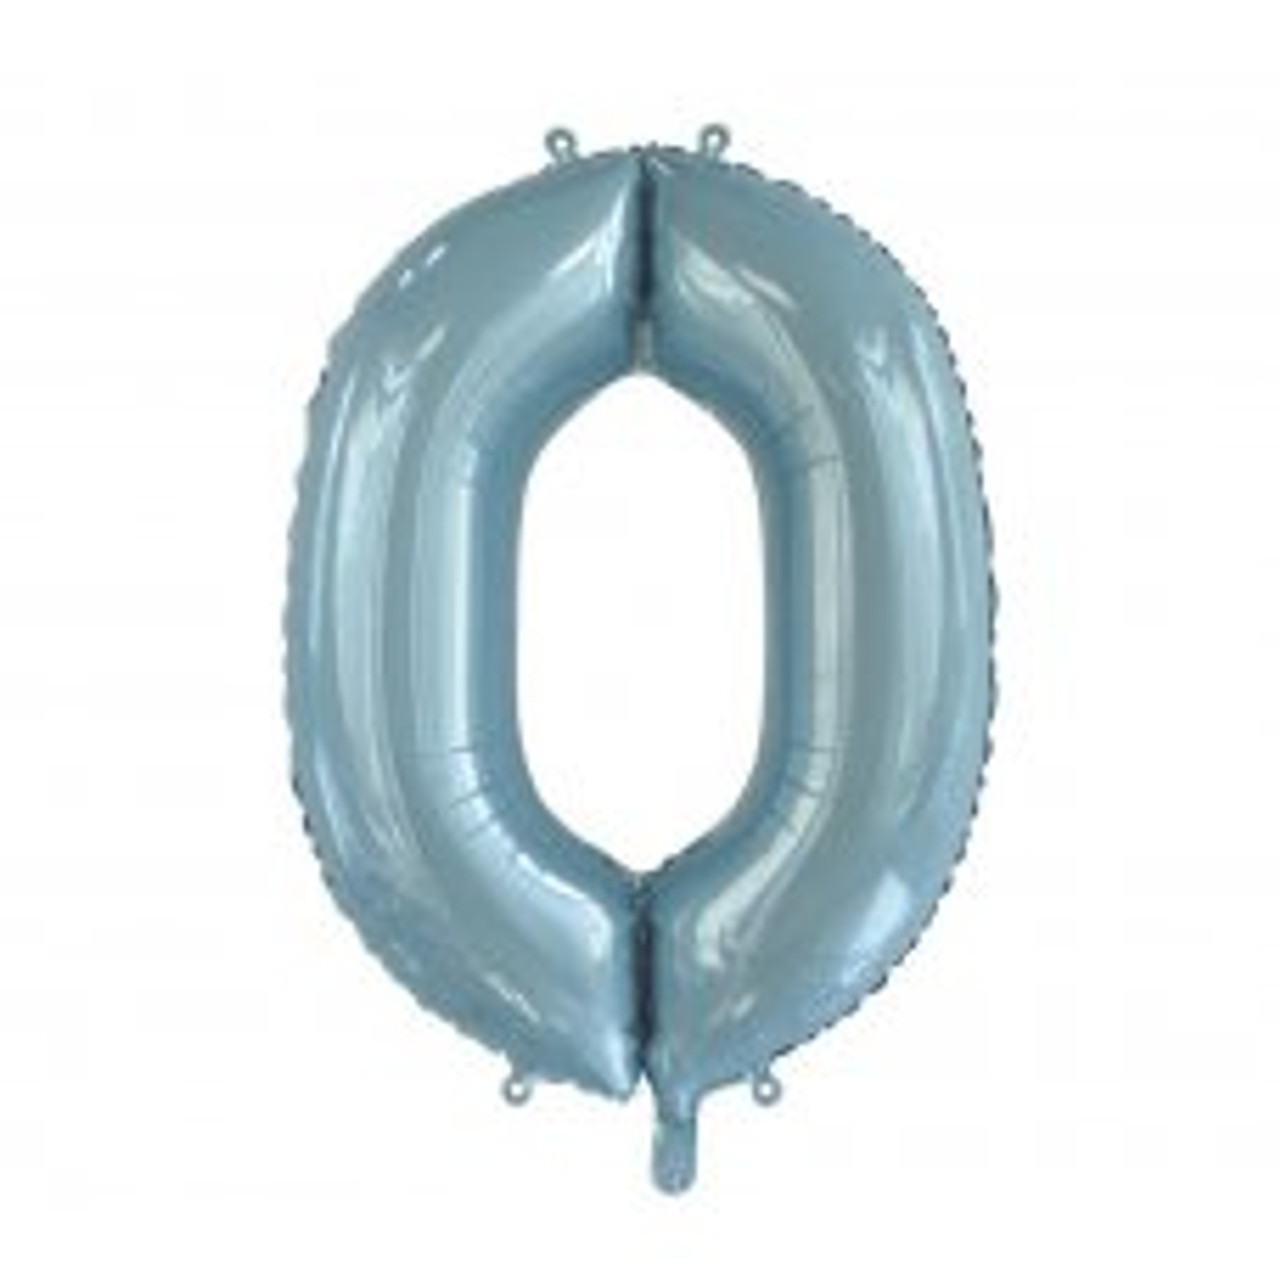 213750 0 NUMERAL LIGHT BLUE FOIL BALLOON 87CM/34 INCH . INC HELIUM, WEIGHT, RIBBON